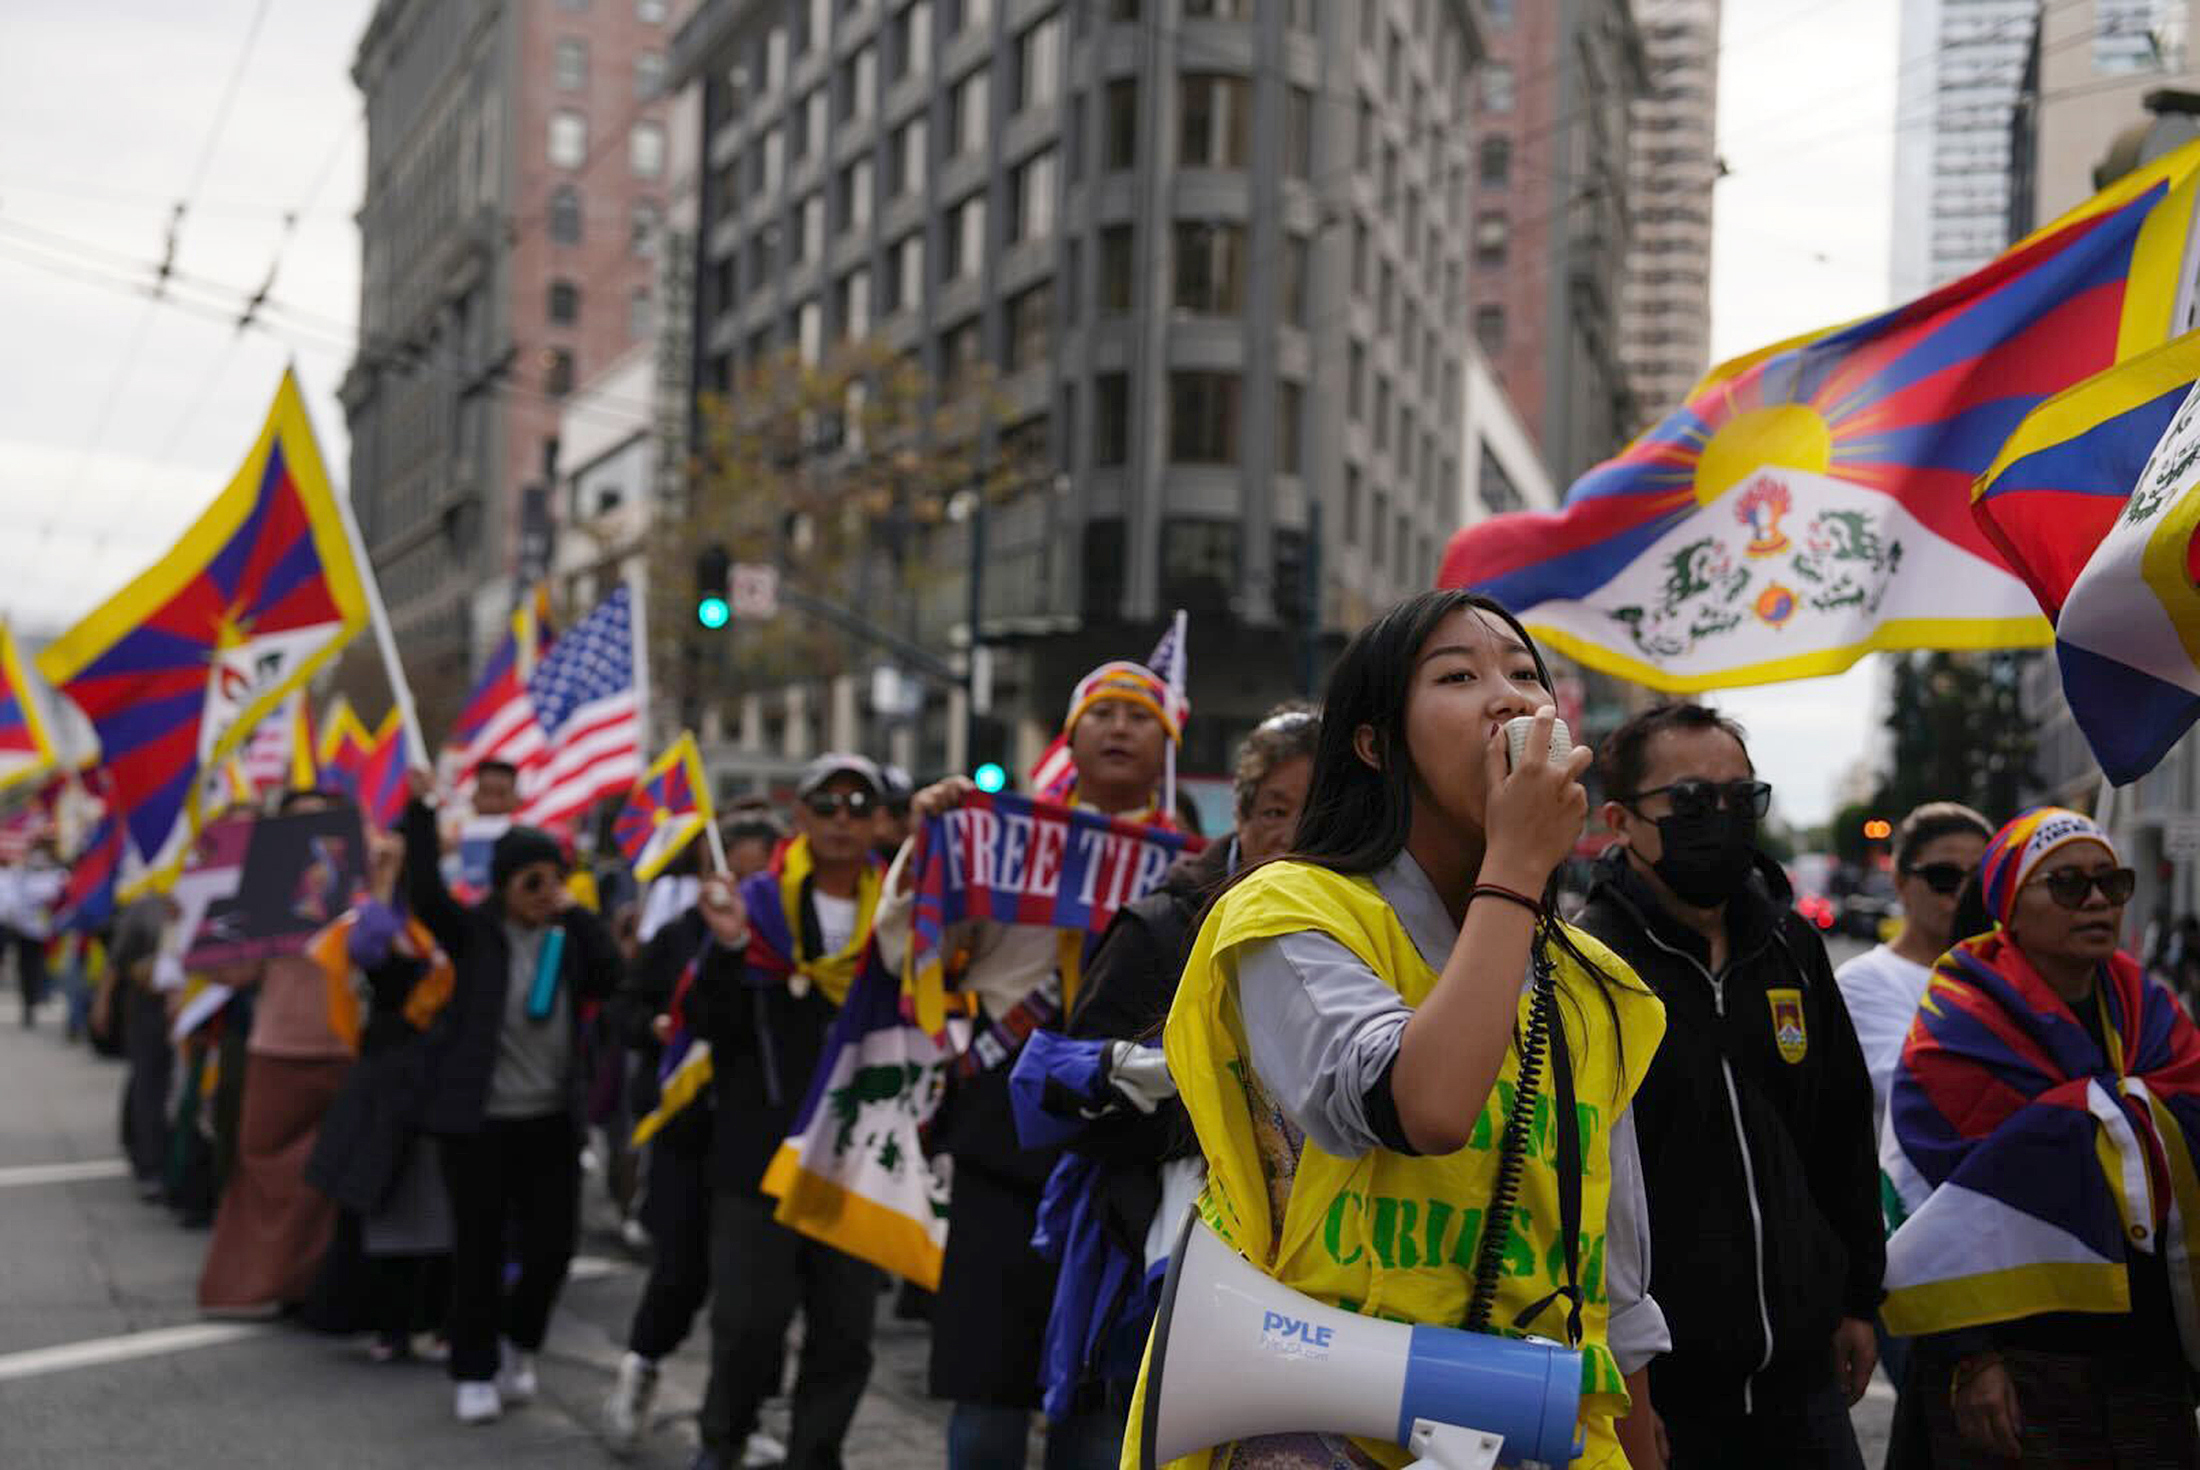 A person screams into a bullhorn during a protest down Market Street. Others in the background hoist Tibetan flags.